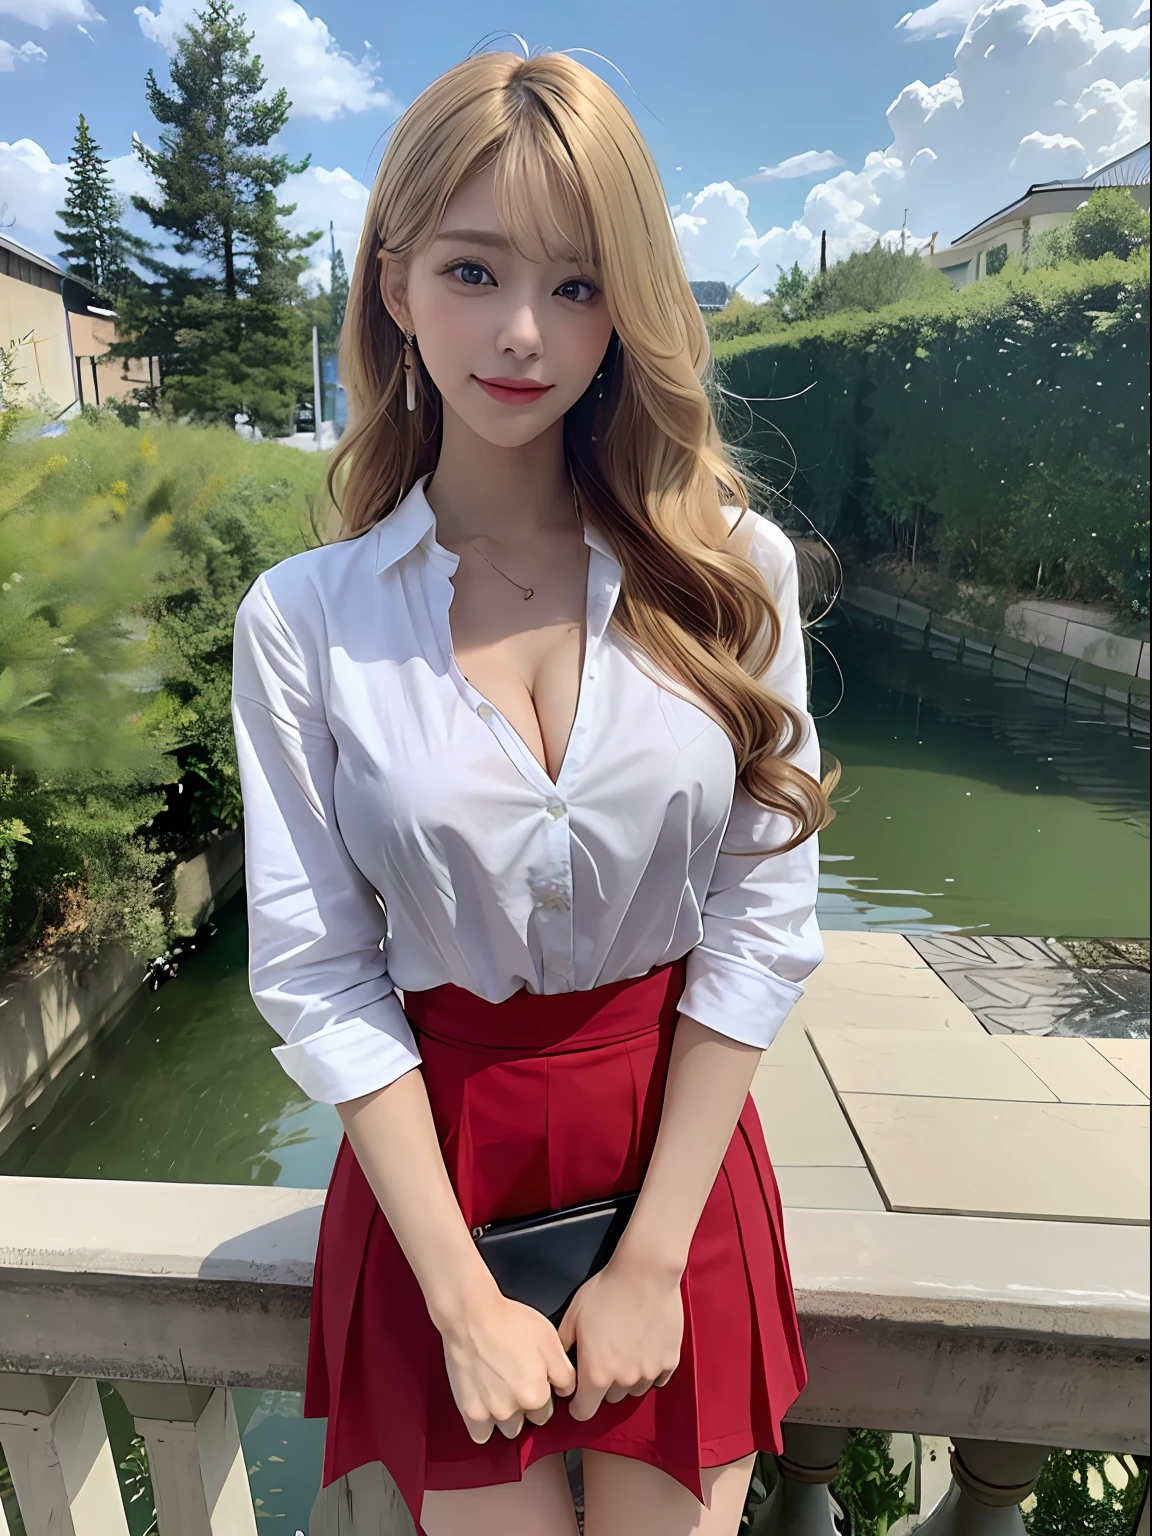 top-quality、​masterpiece、超A high resolution、(Photorealsitic:1.4)、Raw foto、1 girl in、a blond、full body Esbian、cleavage of the breast、double eyelid、Loose and fluffy perm、semi long hair、A smile、get angry、irate、student clothes、a red skirt、White cutter shirt